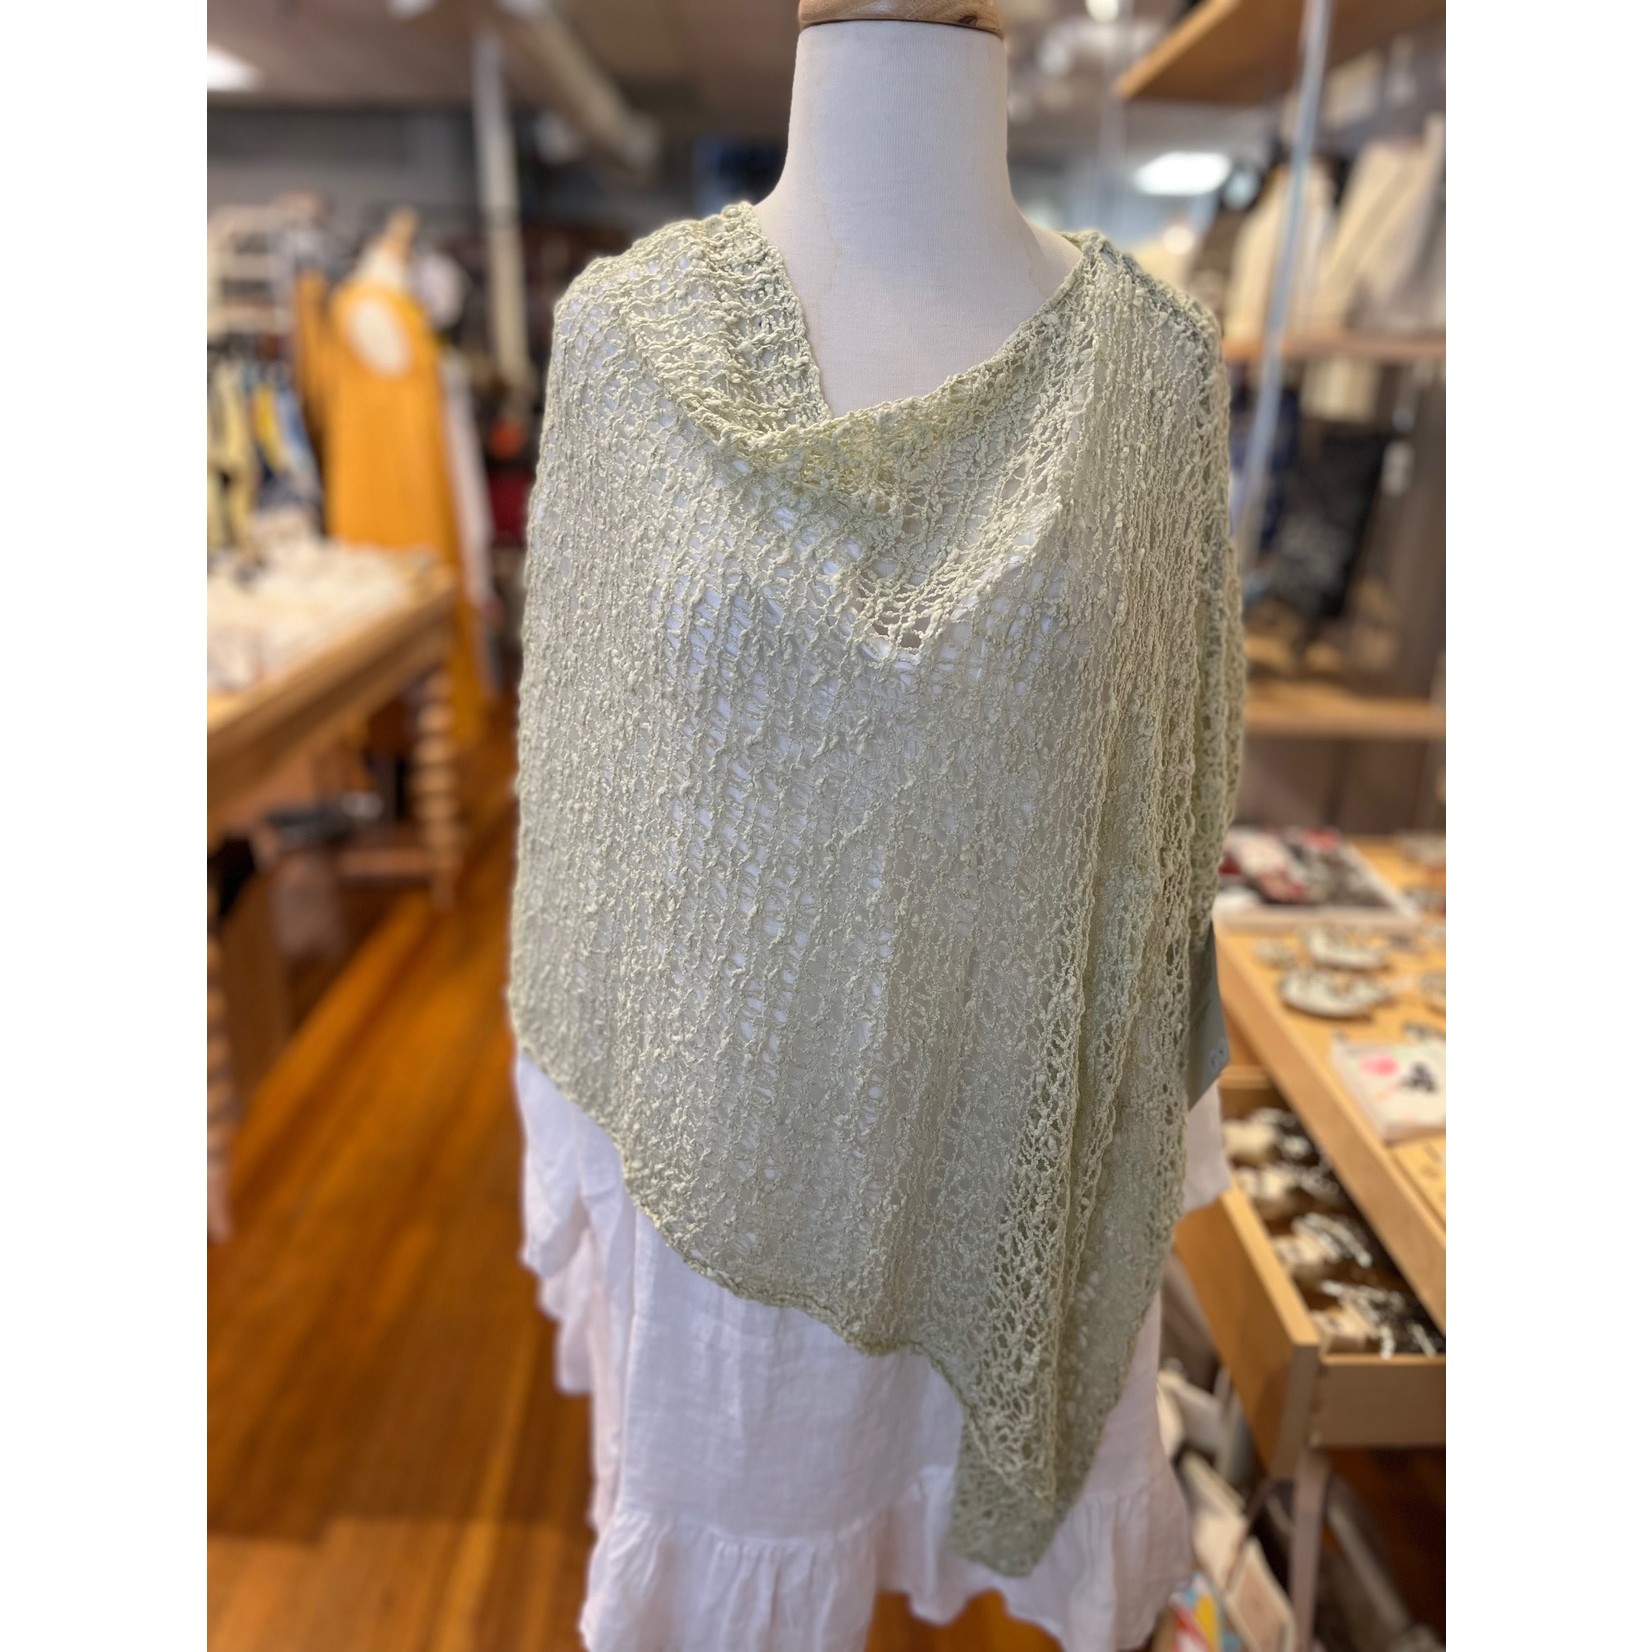 Lost River Imports Popcorn Poncho in Oatmeal (17)